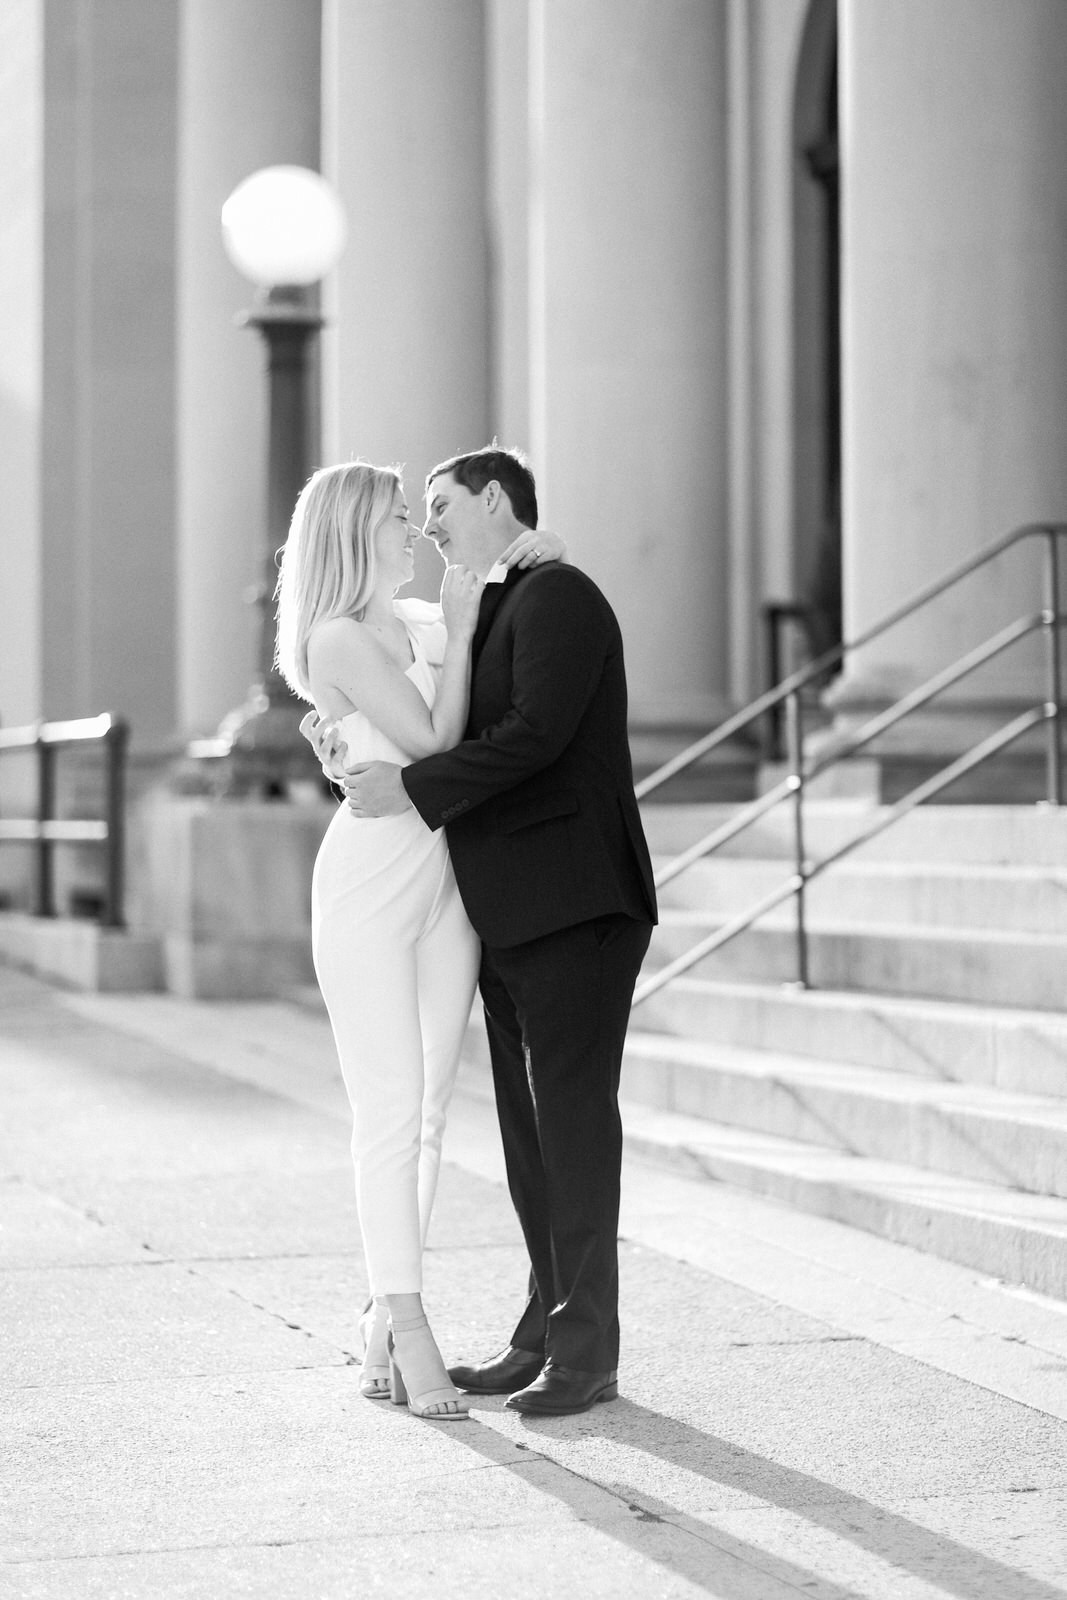 DC Wedding photographer photographs a stylish and classic couple during their downtown engagement photography session before their modern wedding.